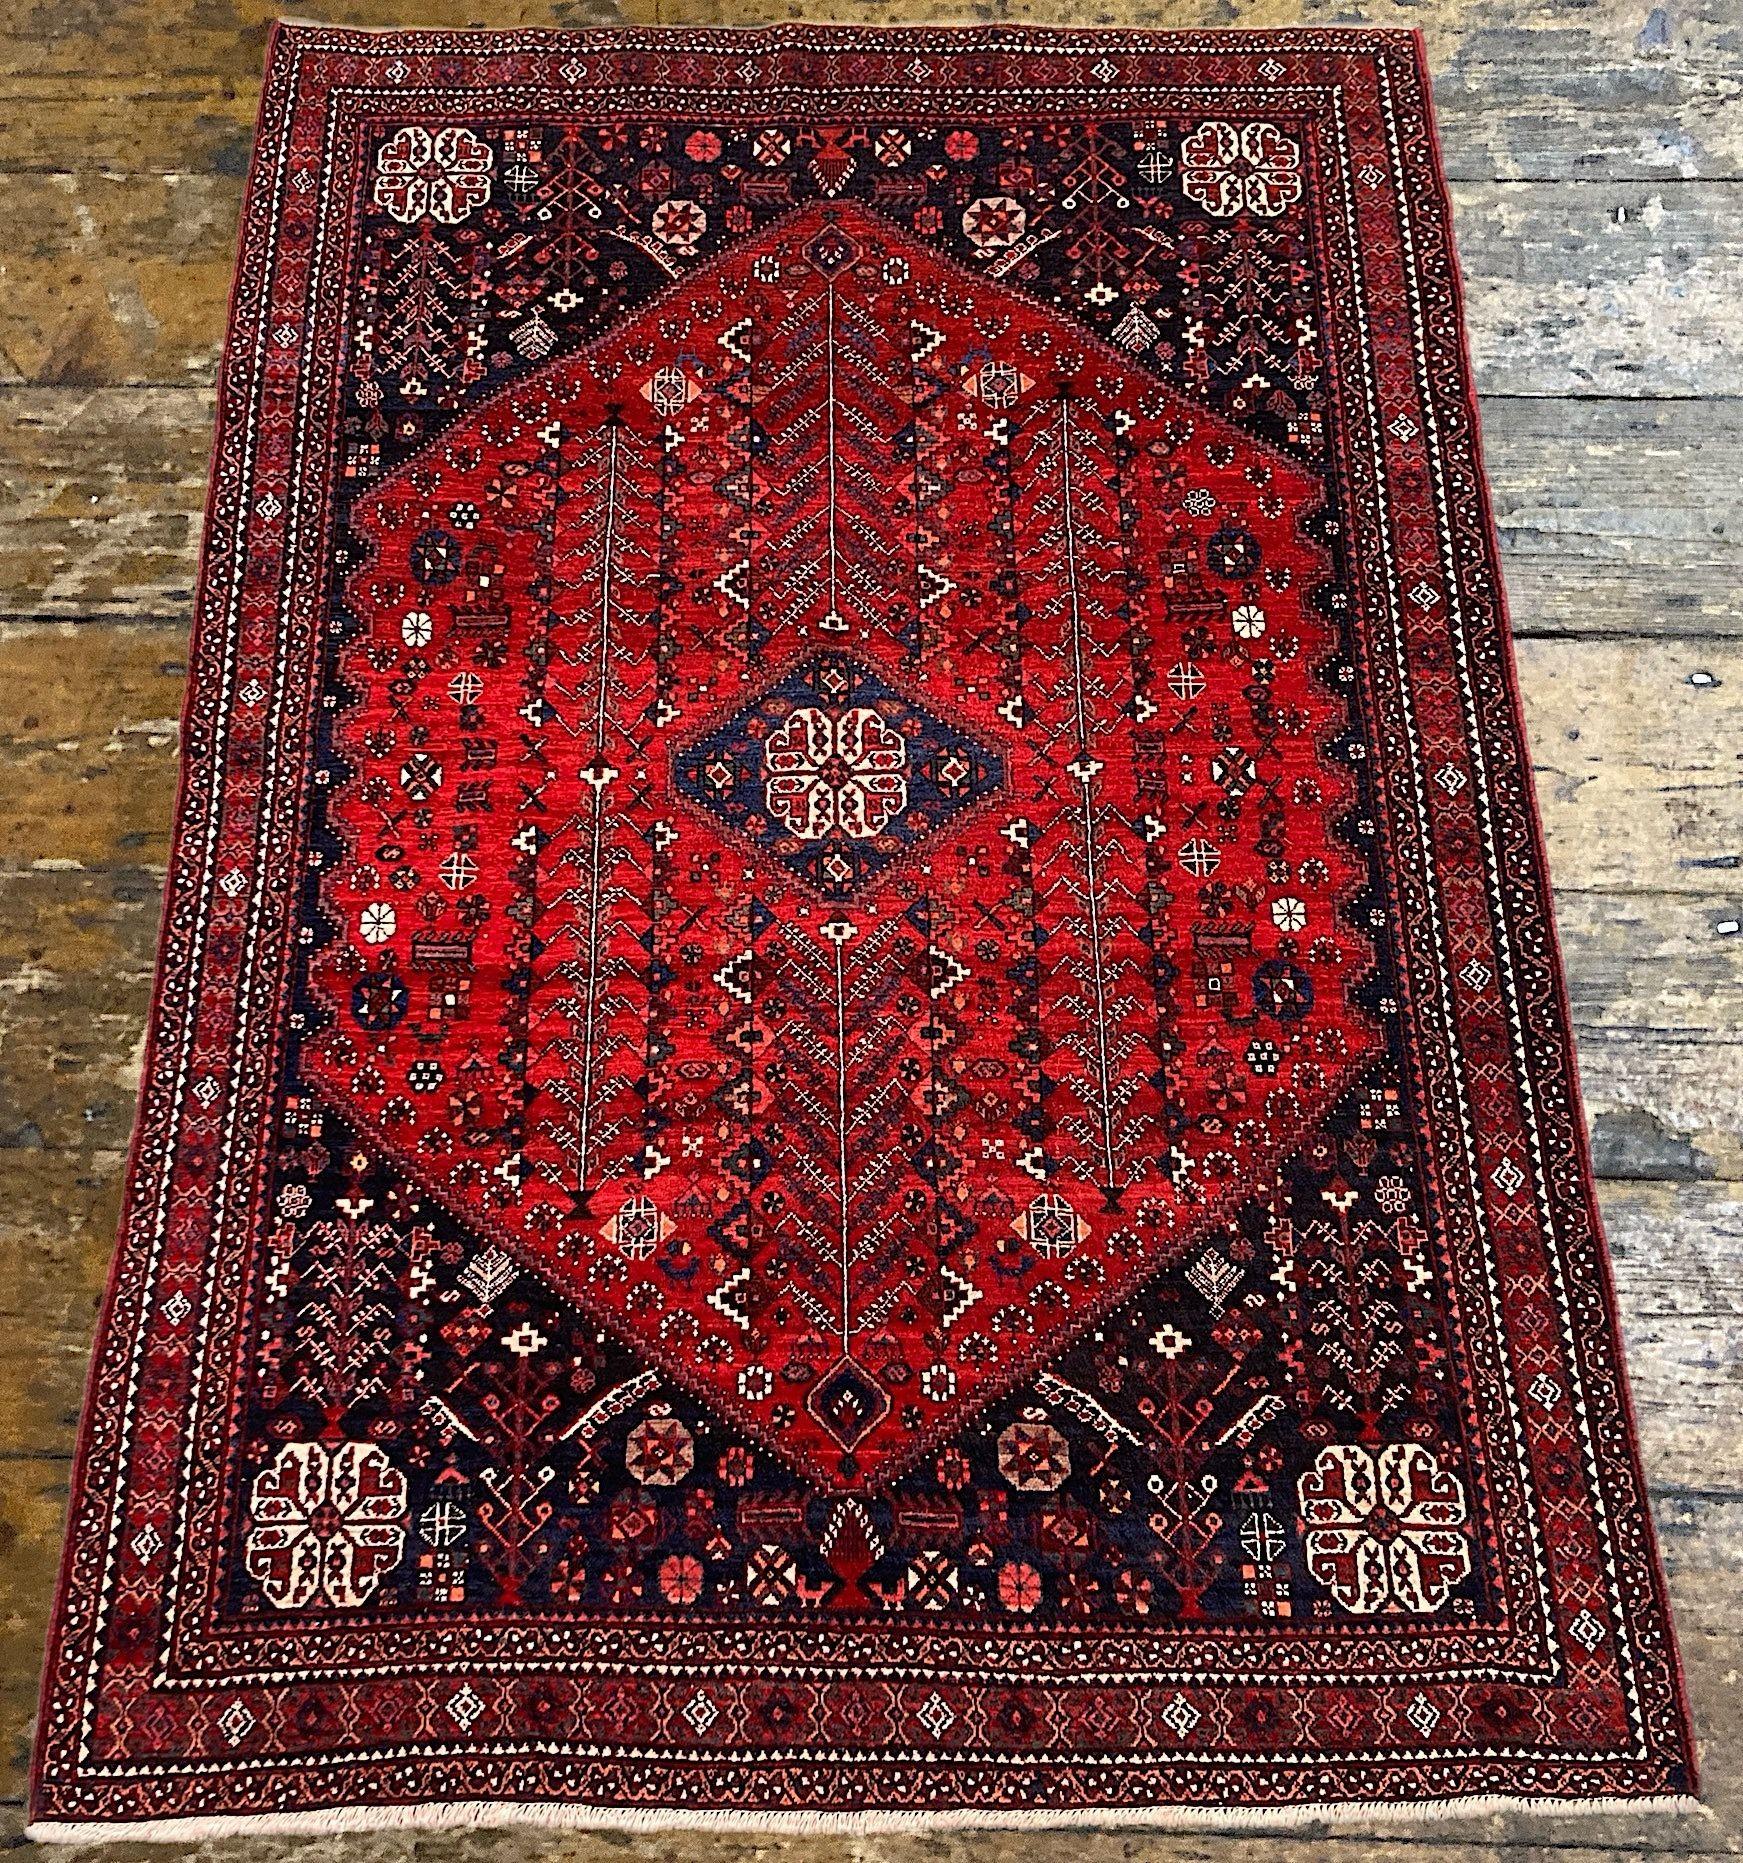 Early 20th Century Antique Abadeh Rug 2.05m x 1.43m